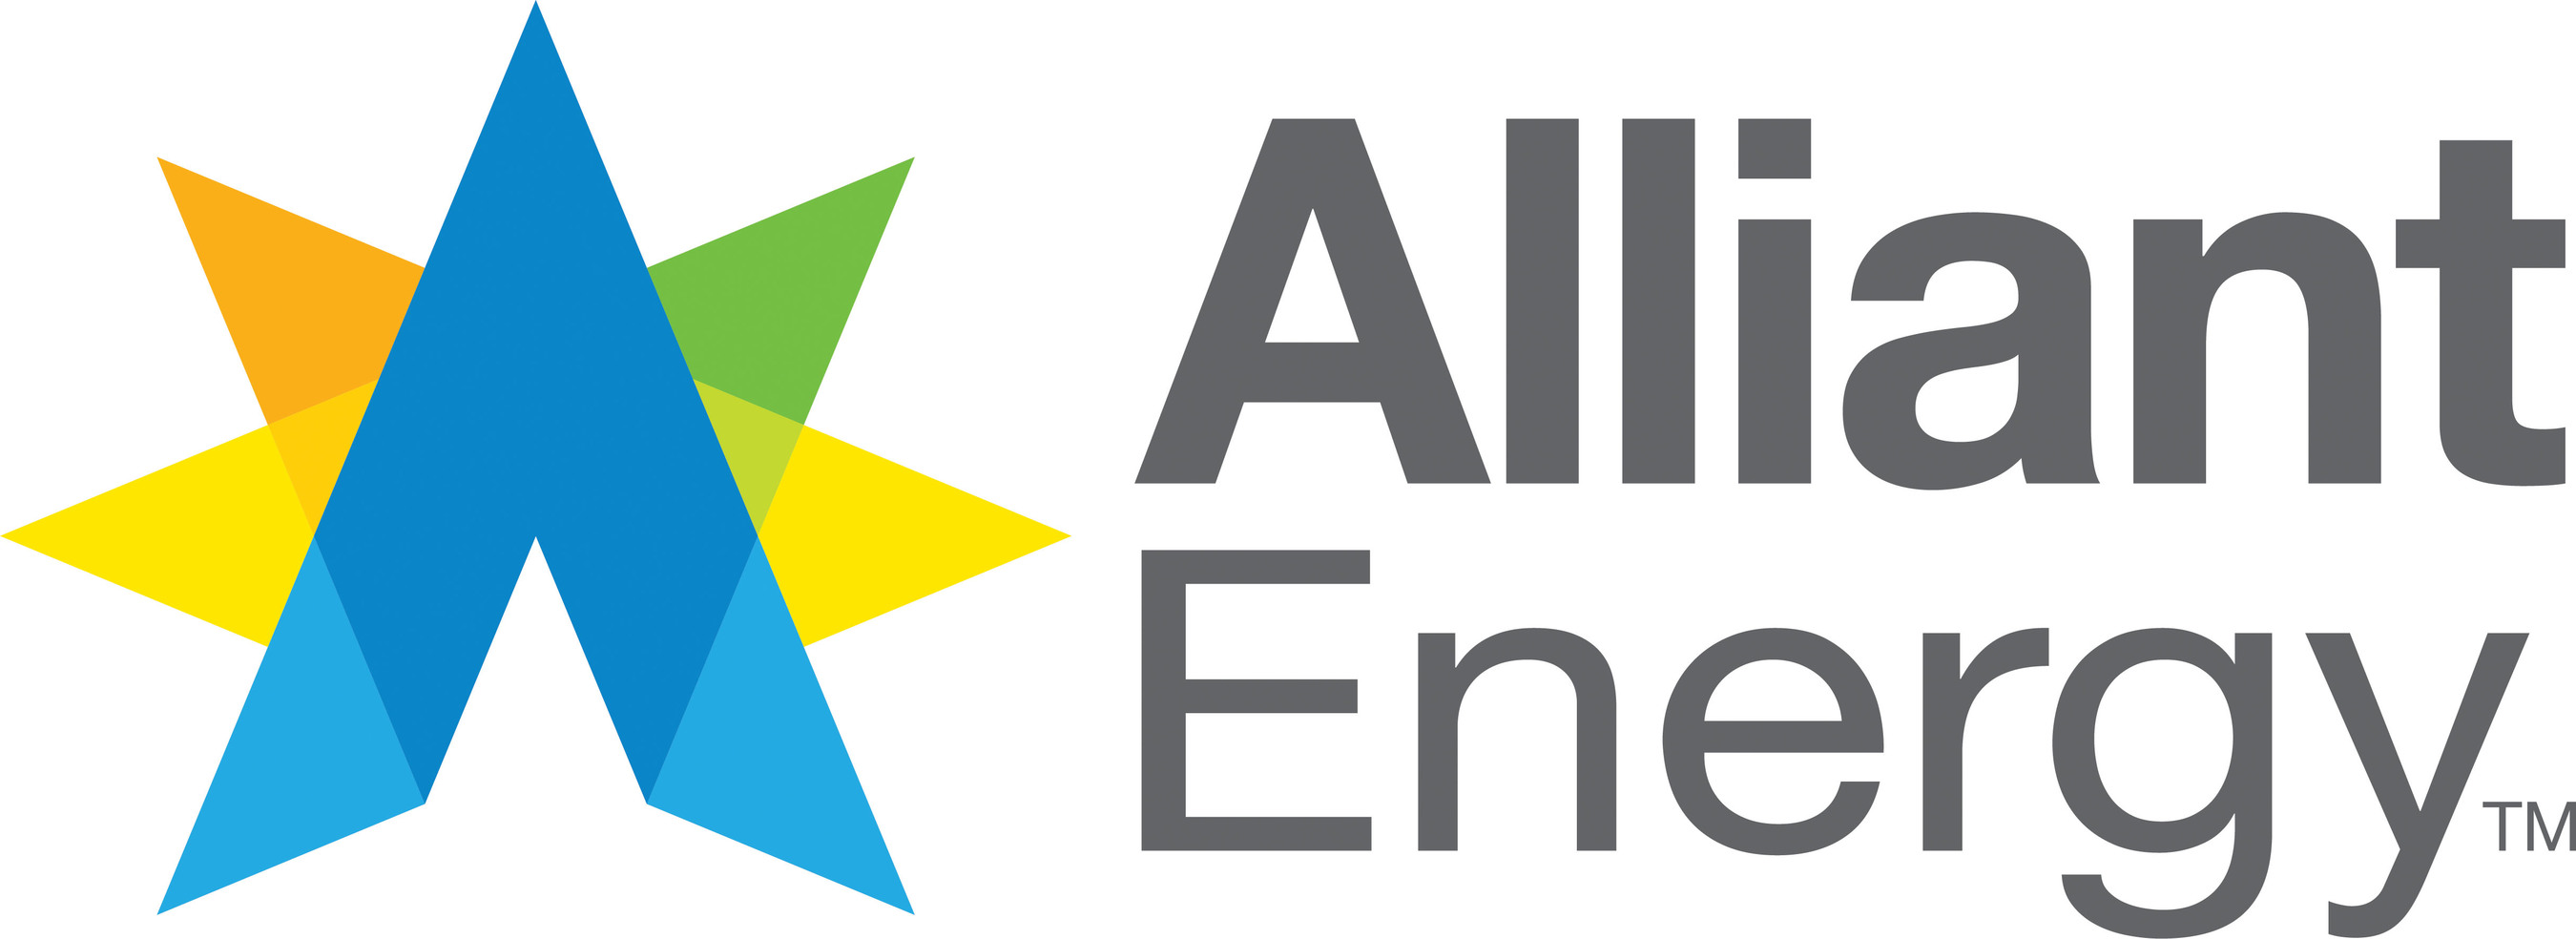 Alliant Energy is the parent company of two public utility companies--Interstate Power and Light Company (IPL) and Wisconsin Power and Light Company (WPL)--and of Alliant Energy Resources, Inc. (AER), the parent company of Alliant Energy's non-regulated operations.